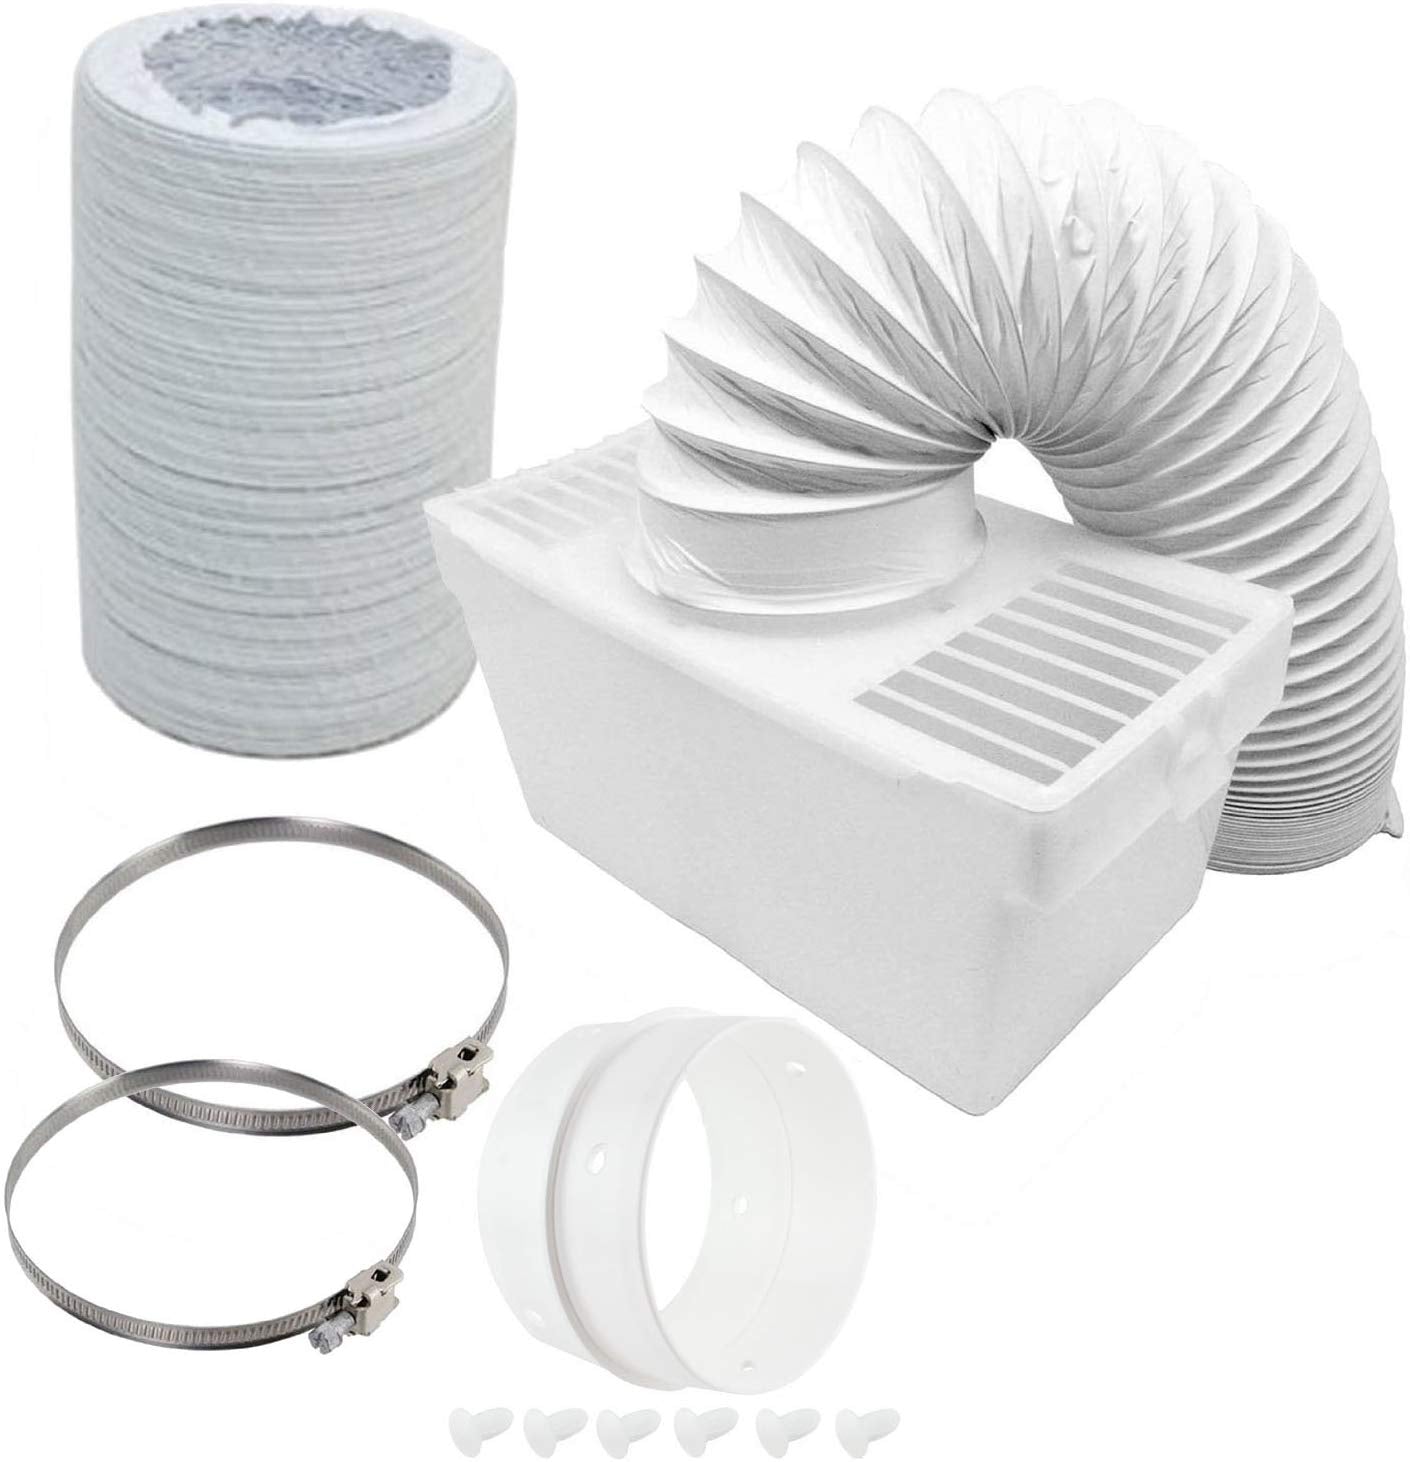 Condenser Box & Extra Long Hose Kit With Connection Ring for Bush Tumble Dryer (4" / 100mm Diameter / 6M Hose)